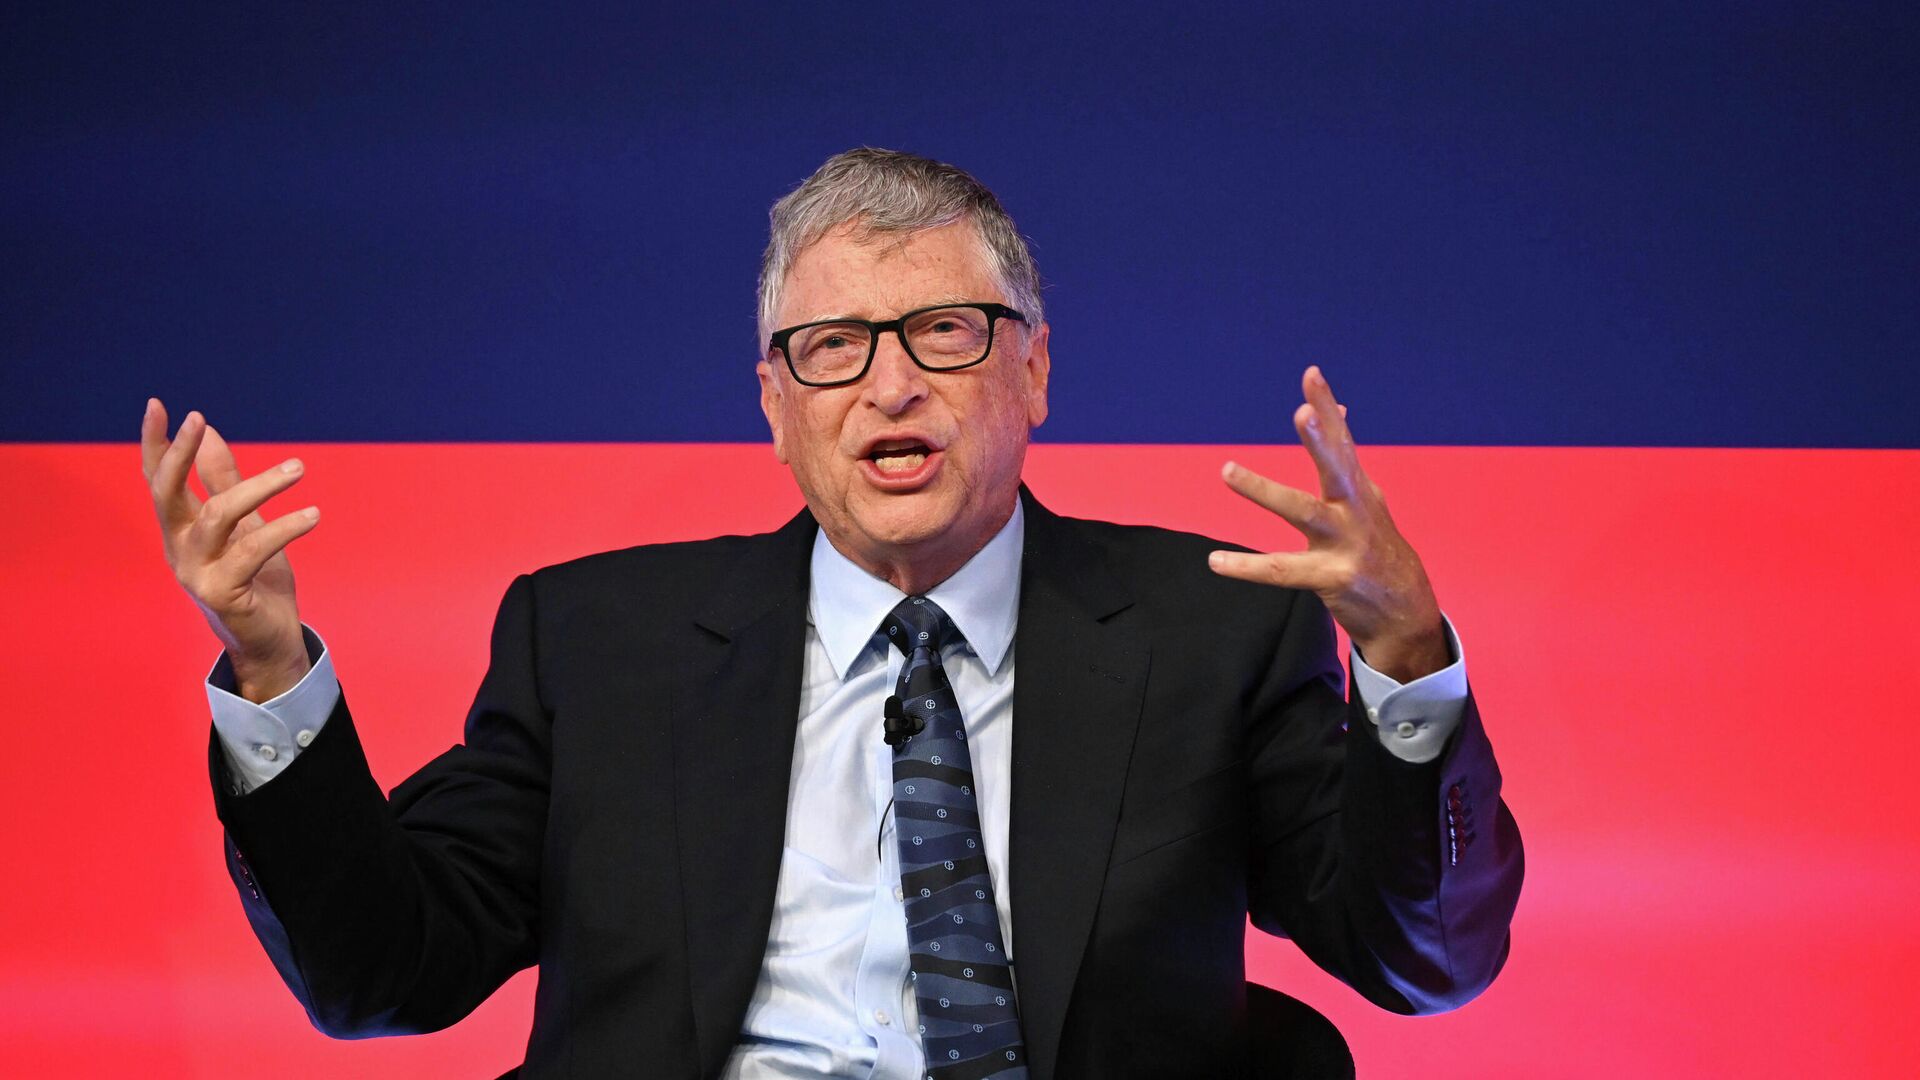 Bill Gates speaks during the Global Investment Summit at the Science Museum, London, Tuesday, Oct, 19, 2021 - Sputnik International, 1920, 23.05.2022